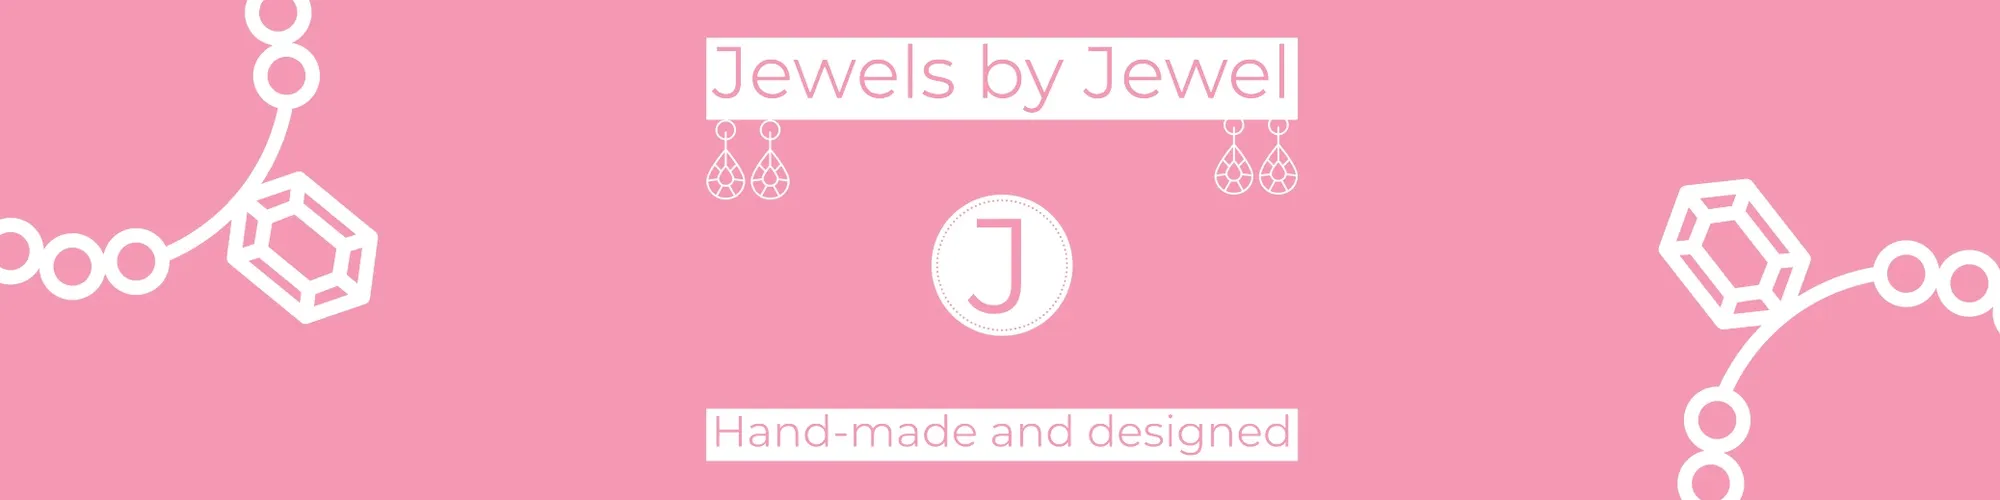 Pink and White Jewels By Jewel Banner